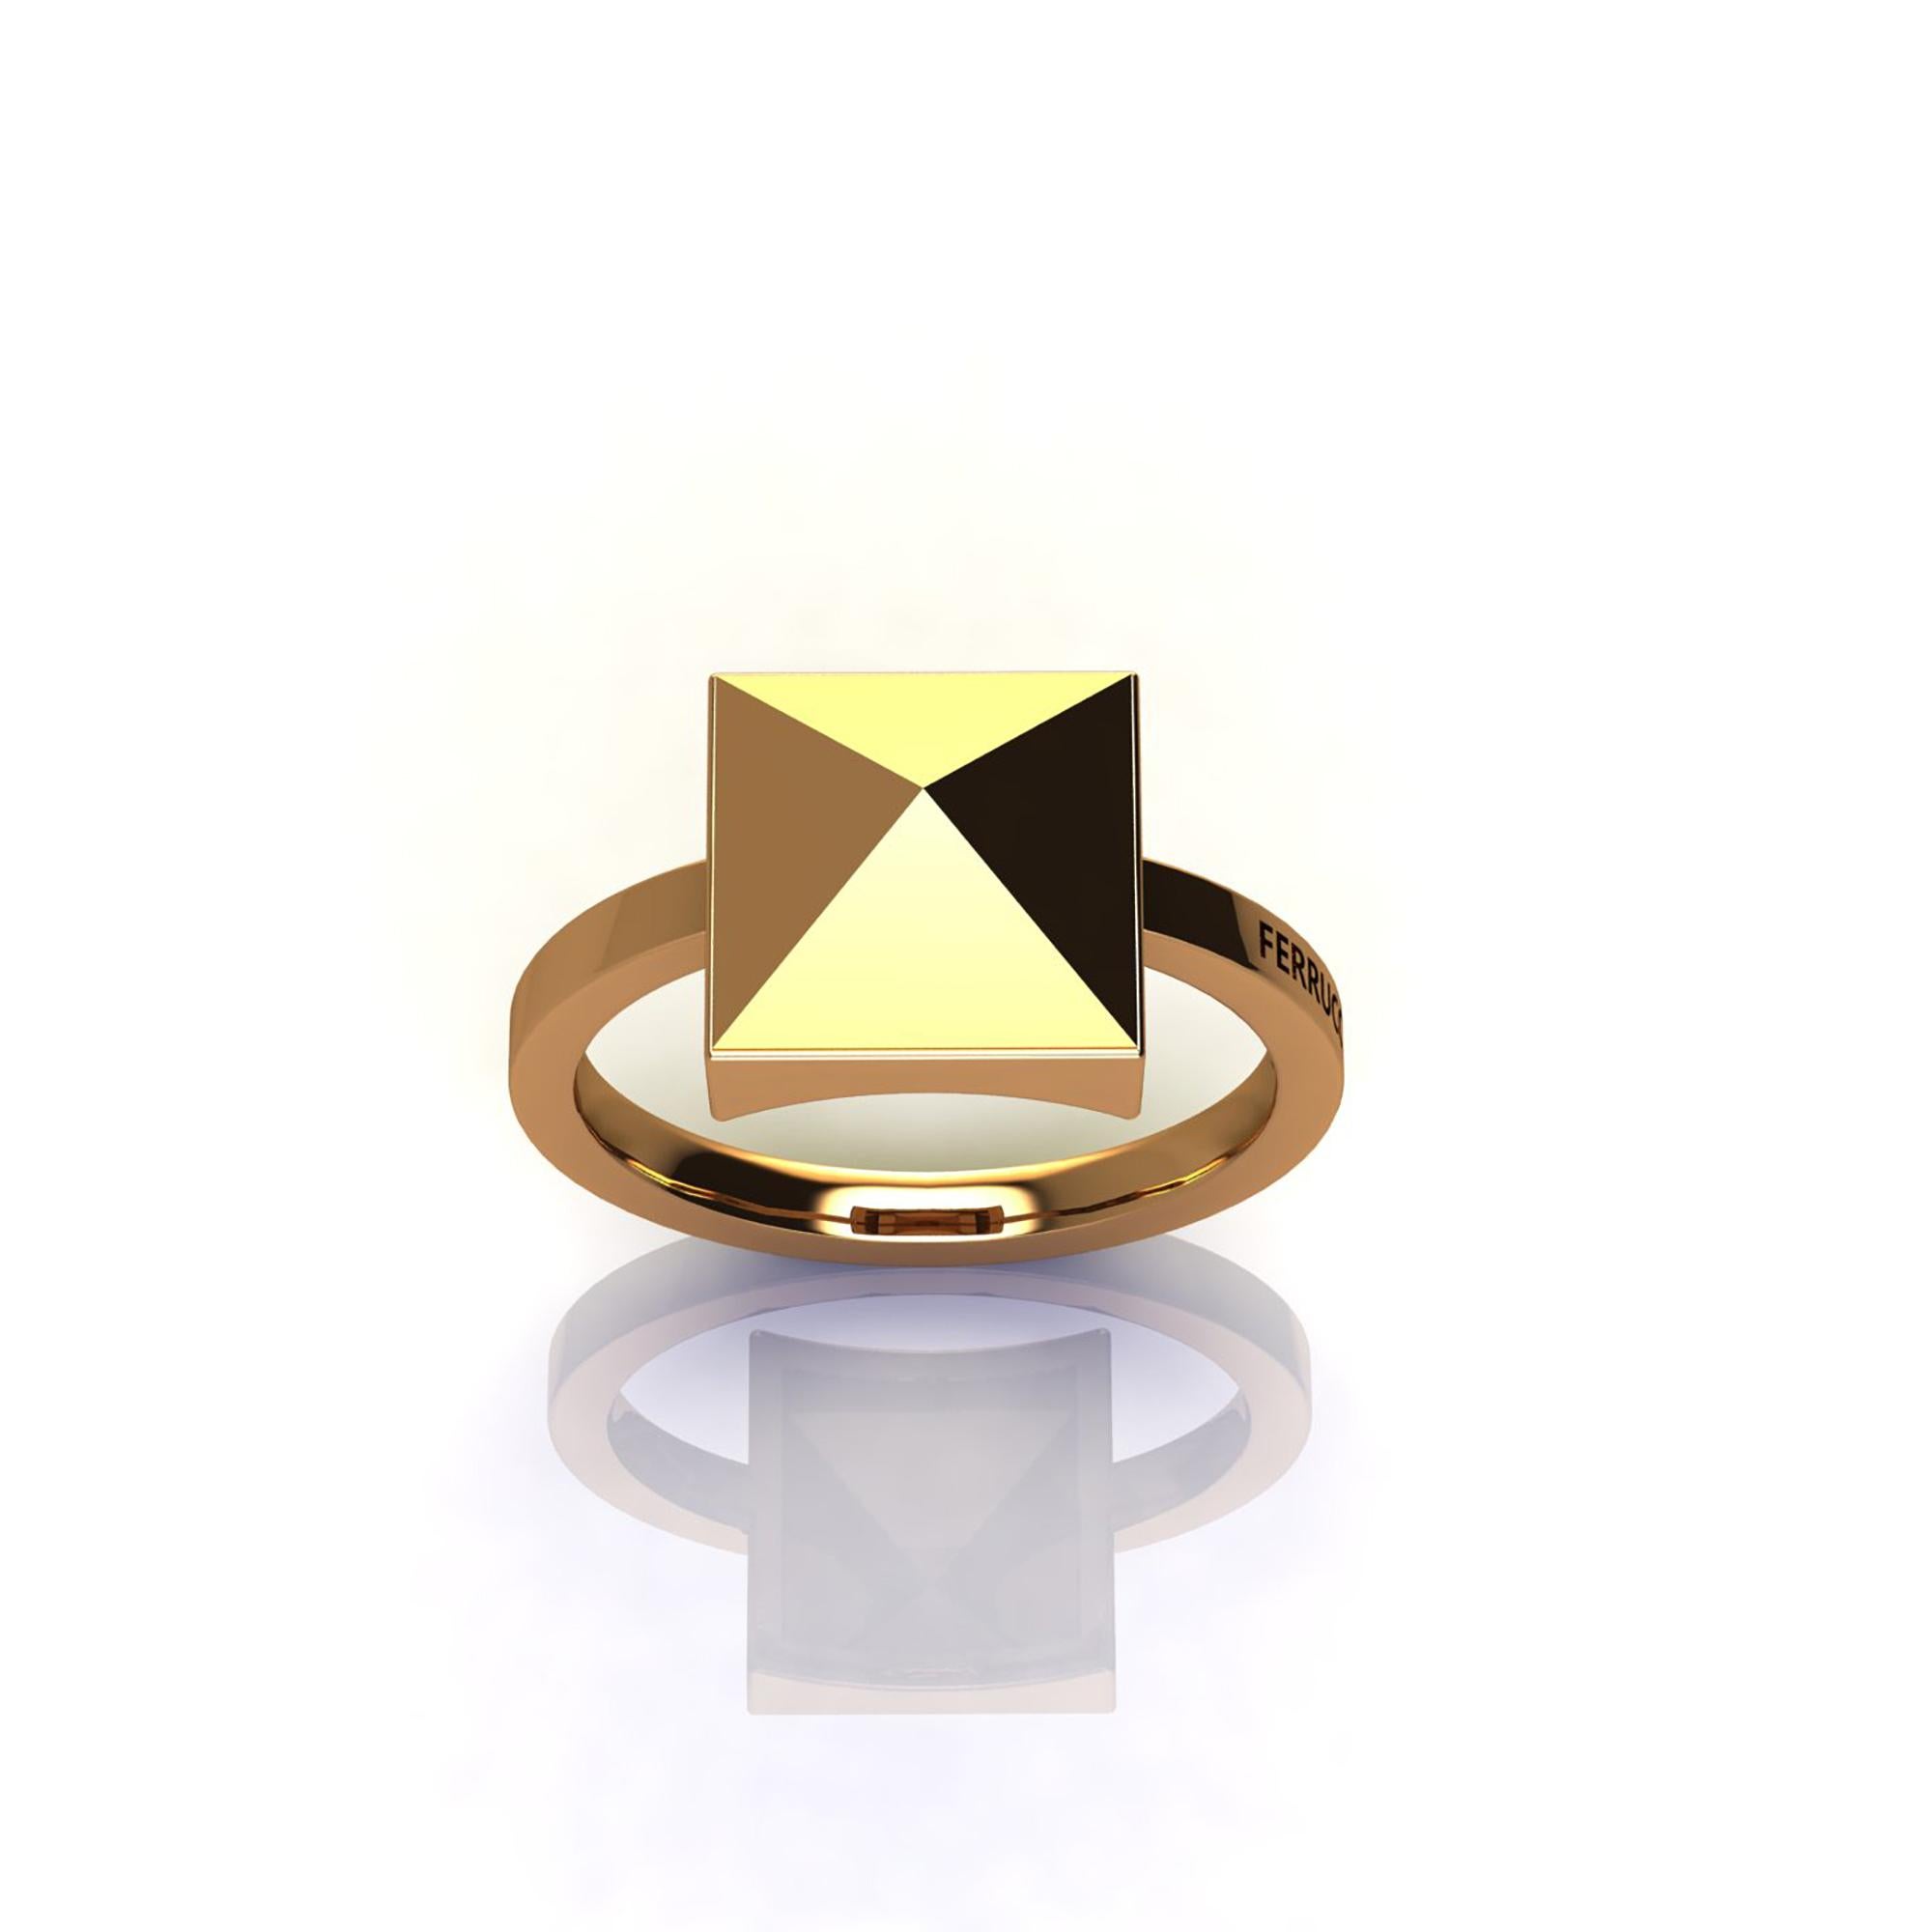 from the Pyramid collection, the 18k yellow gold single Pyramid ring, made in New York.
Perfect to wear every day and evening, everlasting style.
Ring size 6, we offer complimentary sizing upon order.